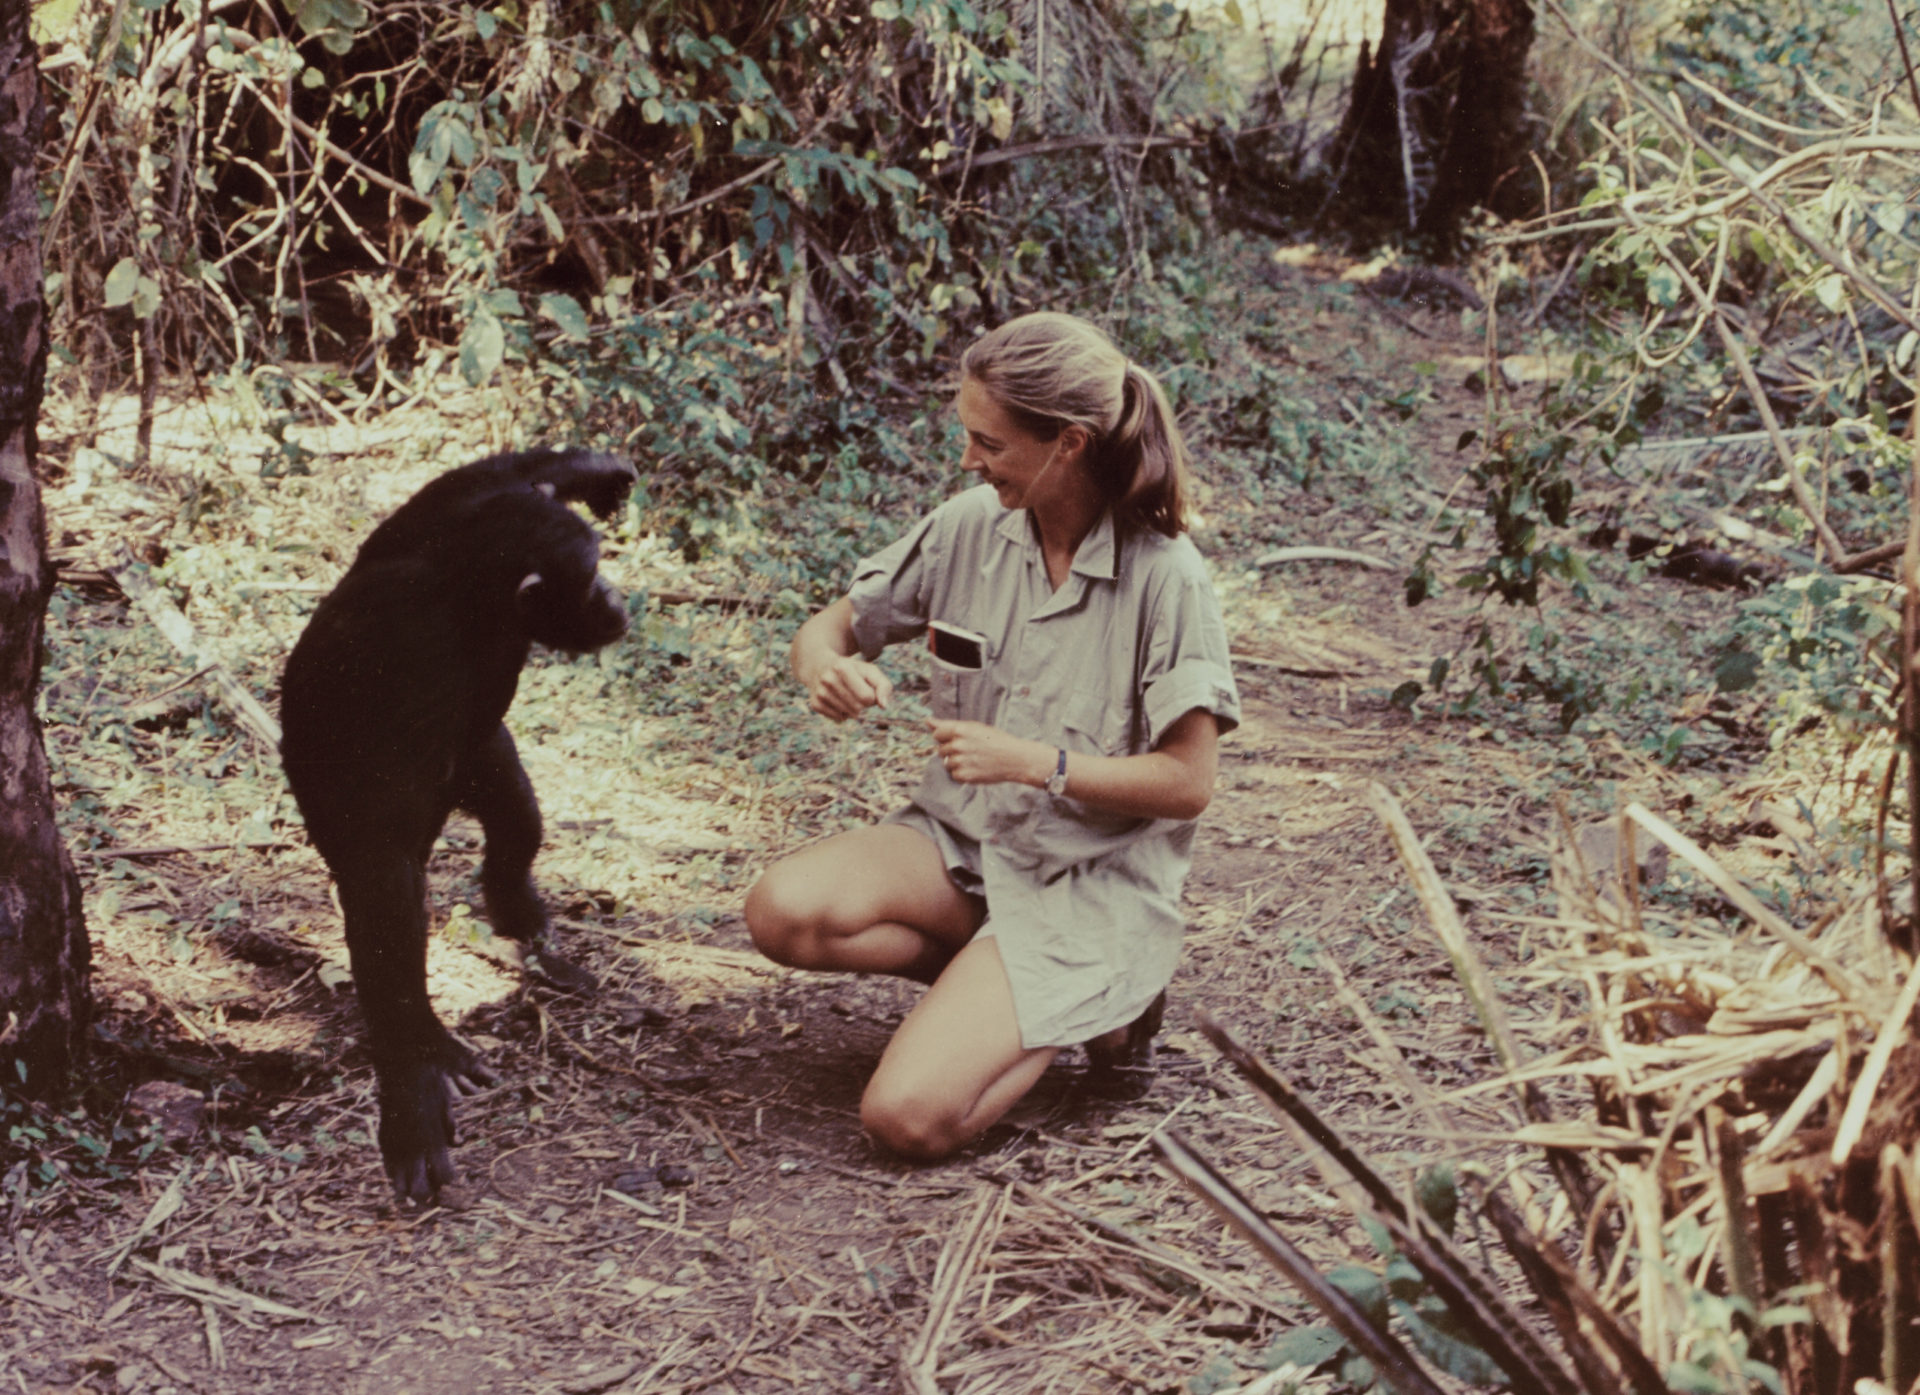 Jane Goodall interacting with chipmanzee in 1965